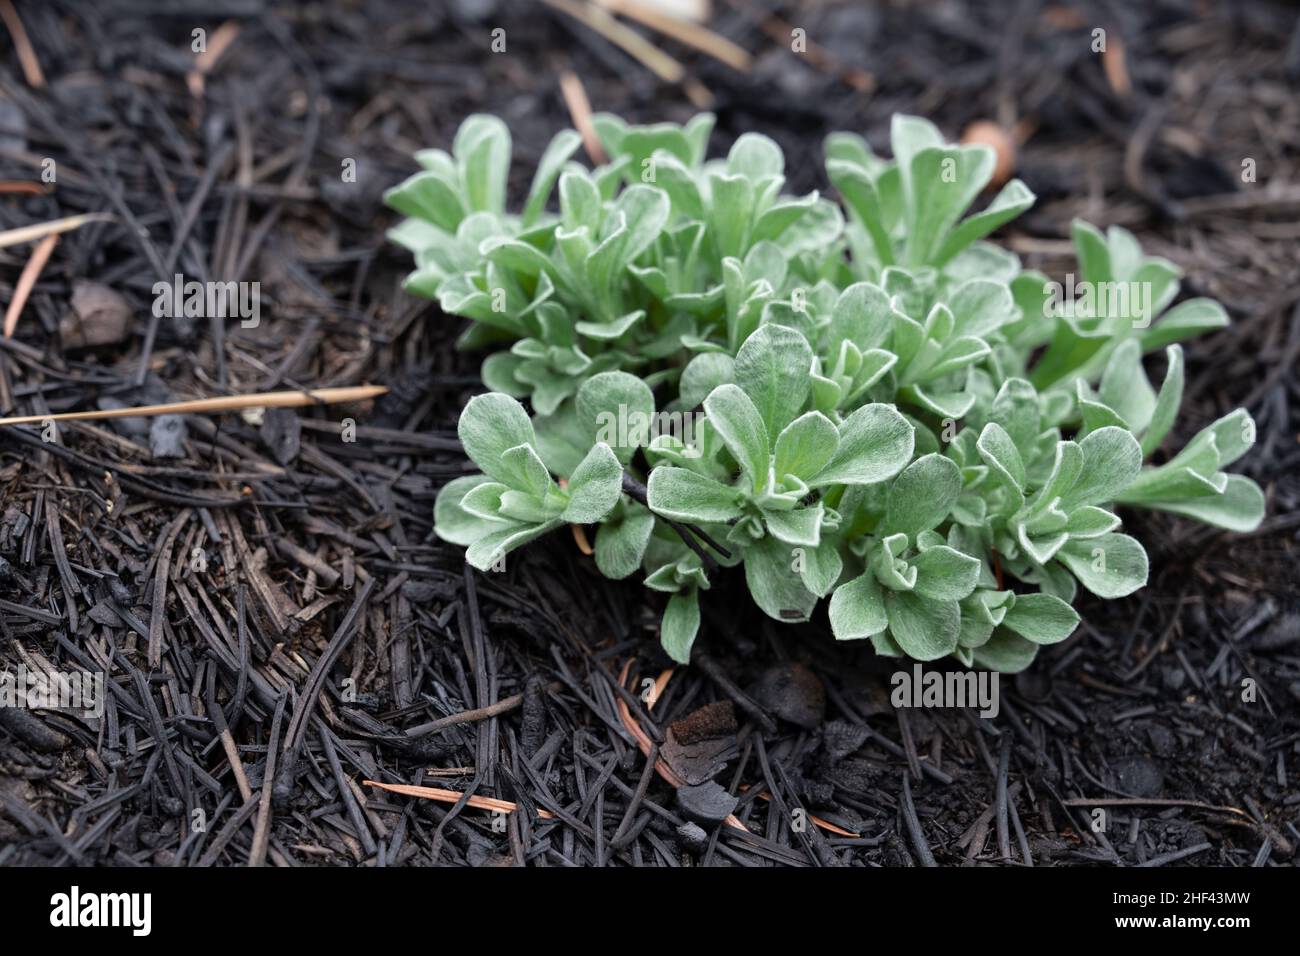 Plant life returns following a forest fire Stock Photo